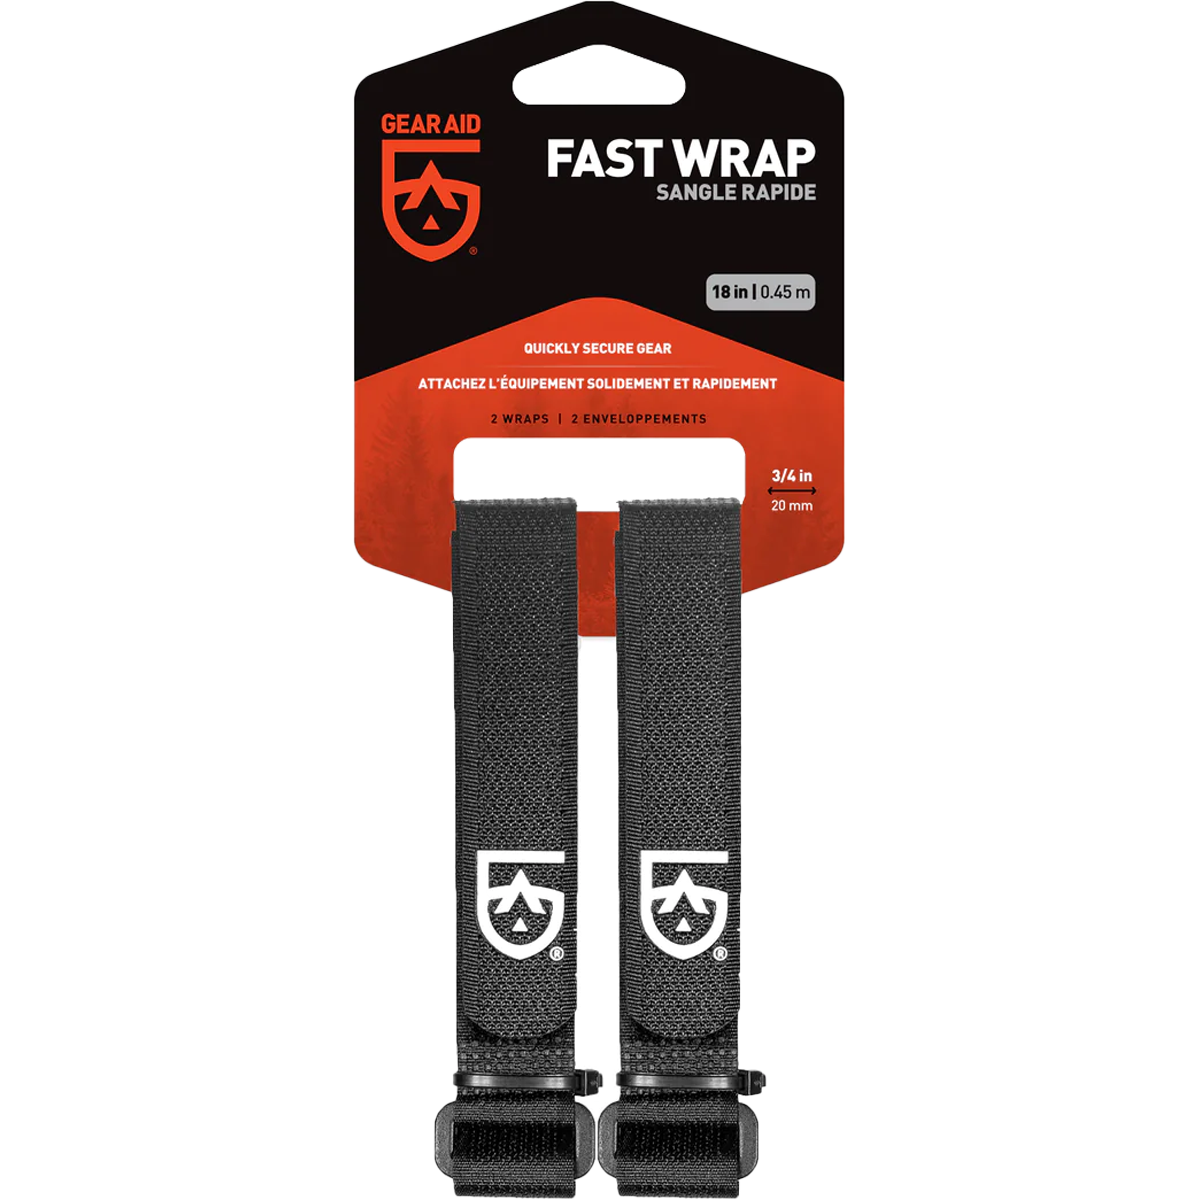 Fast Wrap - 18 in. alternate view